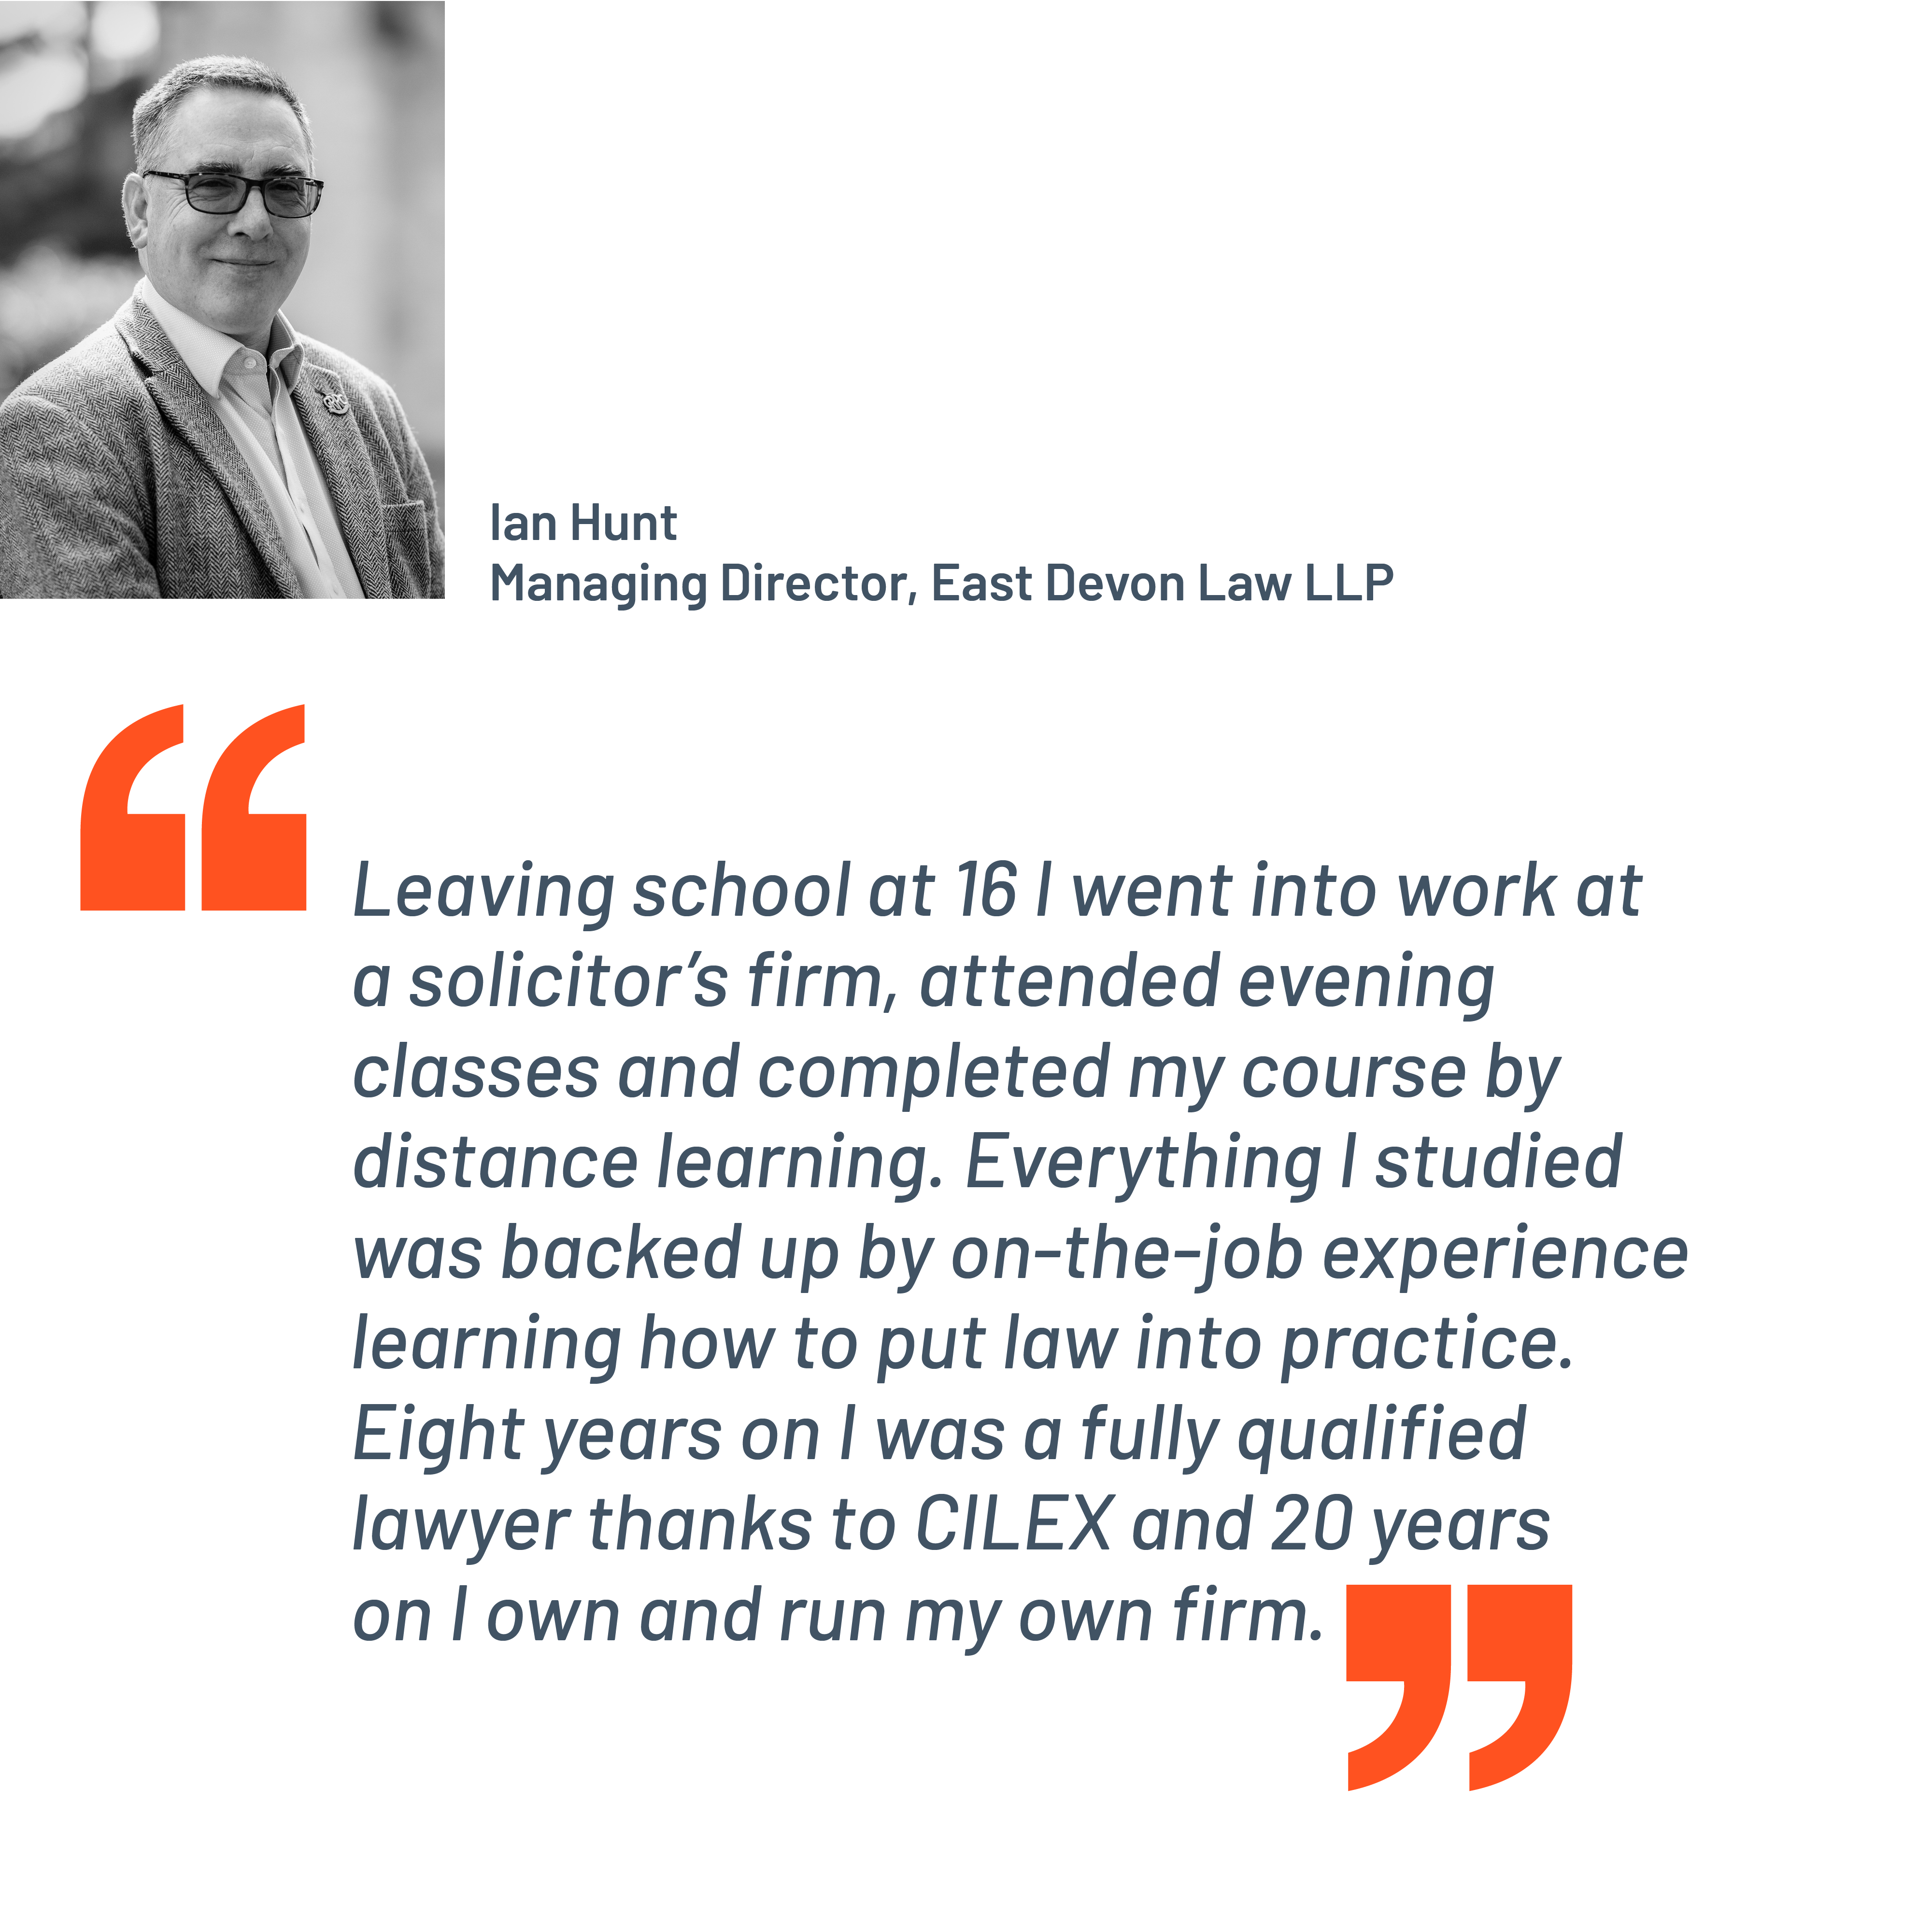 Quote from Ian Hunt, Managing Director, East Devon Law LLP. "Leaving school at 16 I went into work at a solicitor’s firm, attended evening classes and completed my course by distance learning. Everything I studied was backed up by on-the-job experience learning how to put law into practice. Eight years on I was a fully qualified lawyer thanks to CILEX and 20 years on I own and run my own firm."